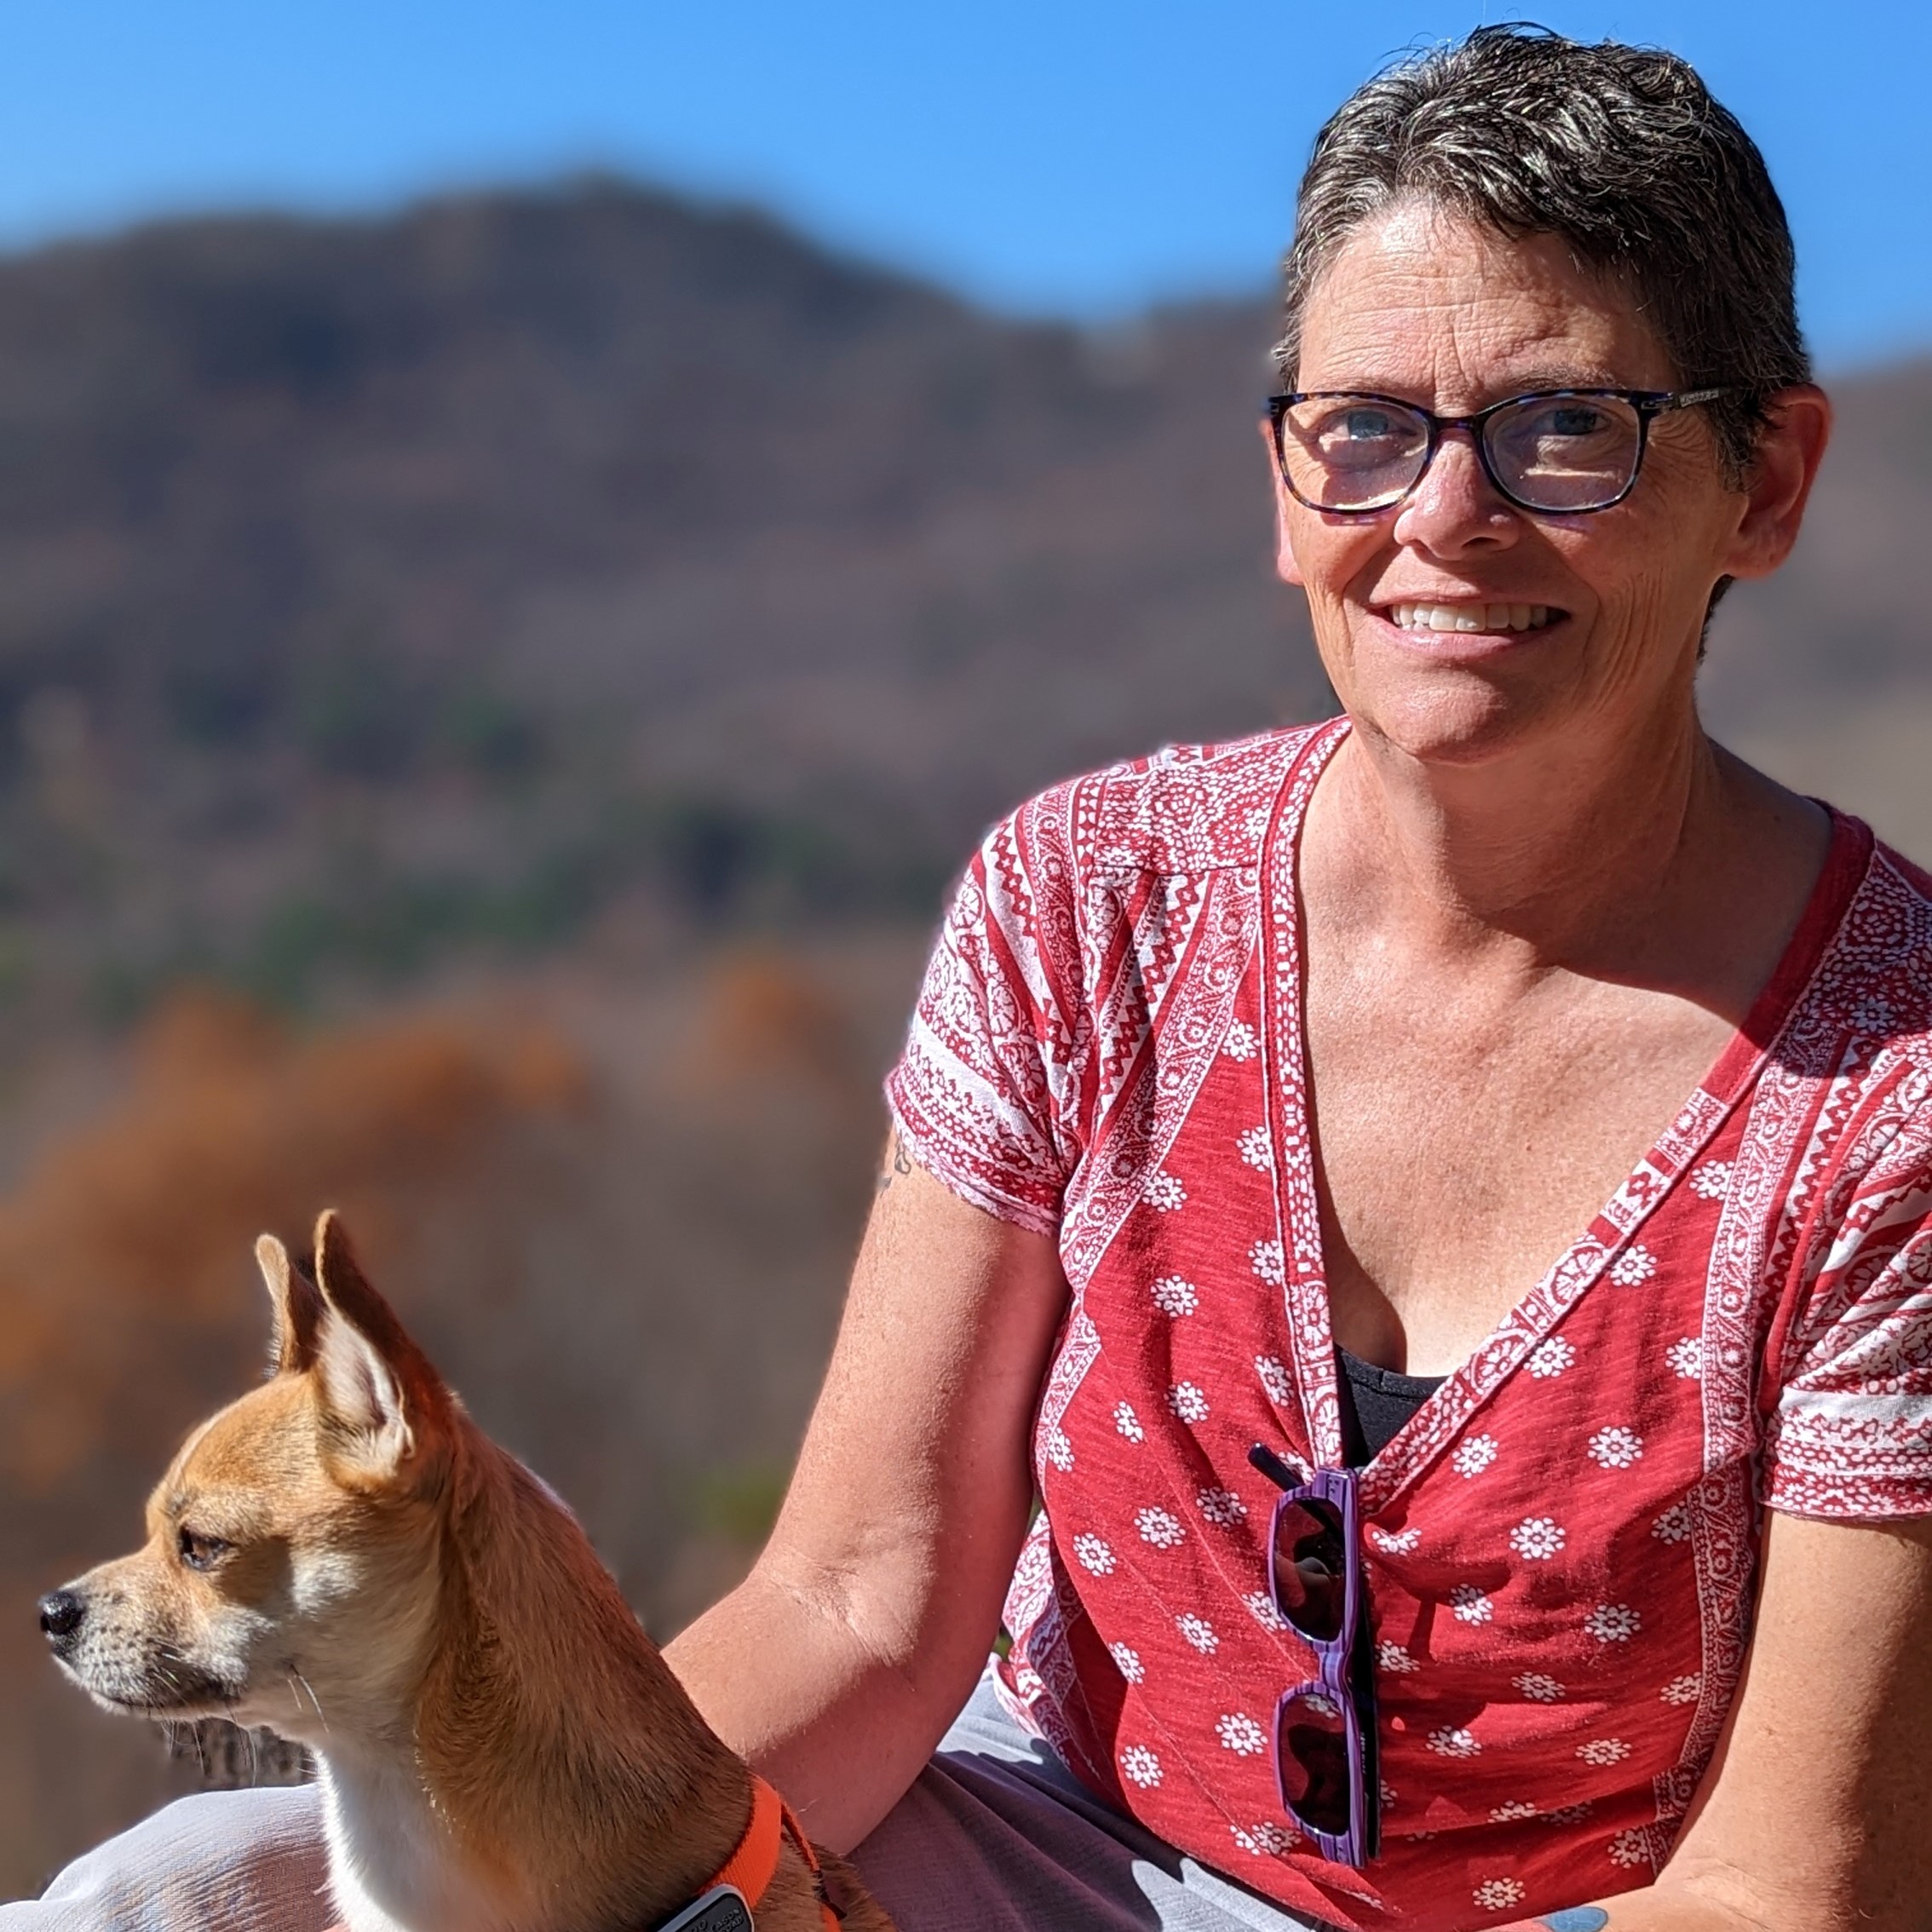 Jennifer Gleason smiling, glasses, short hair, outside with dog, mountains in background